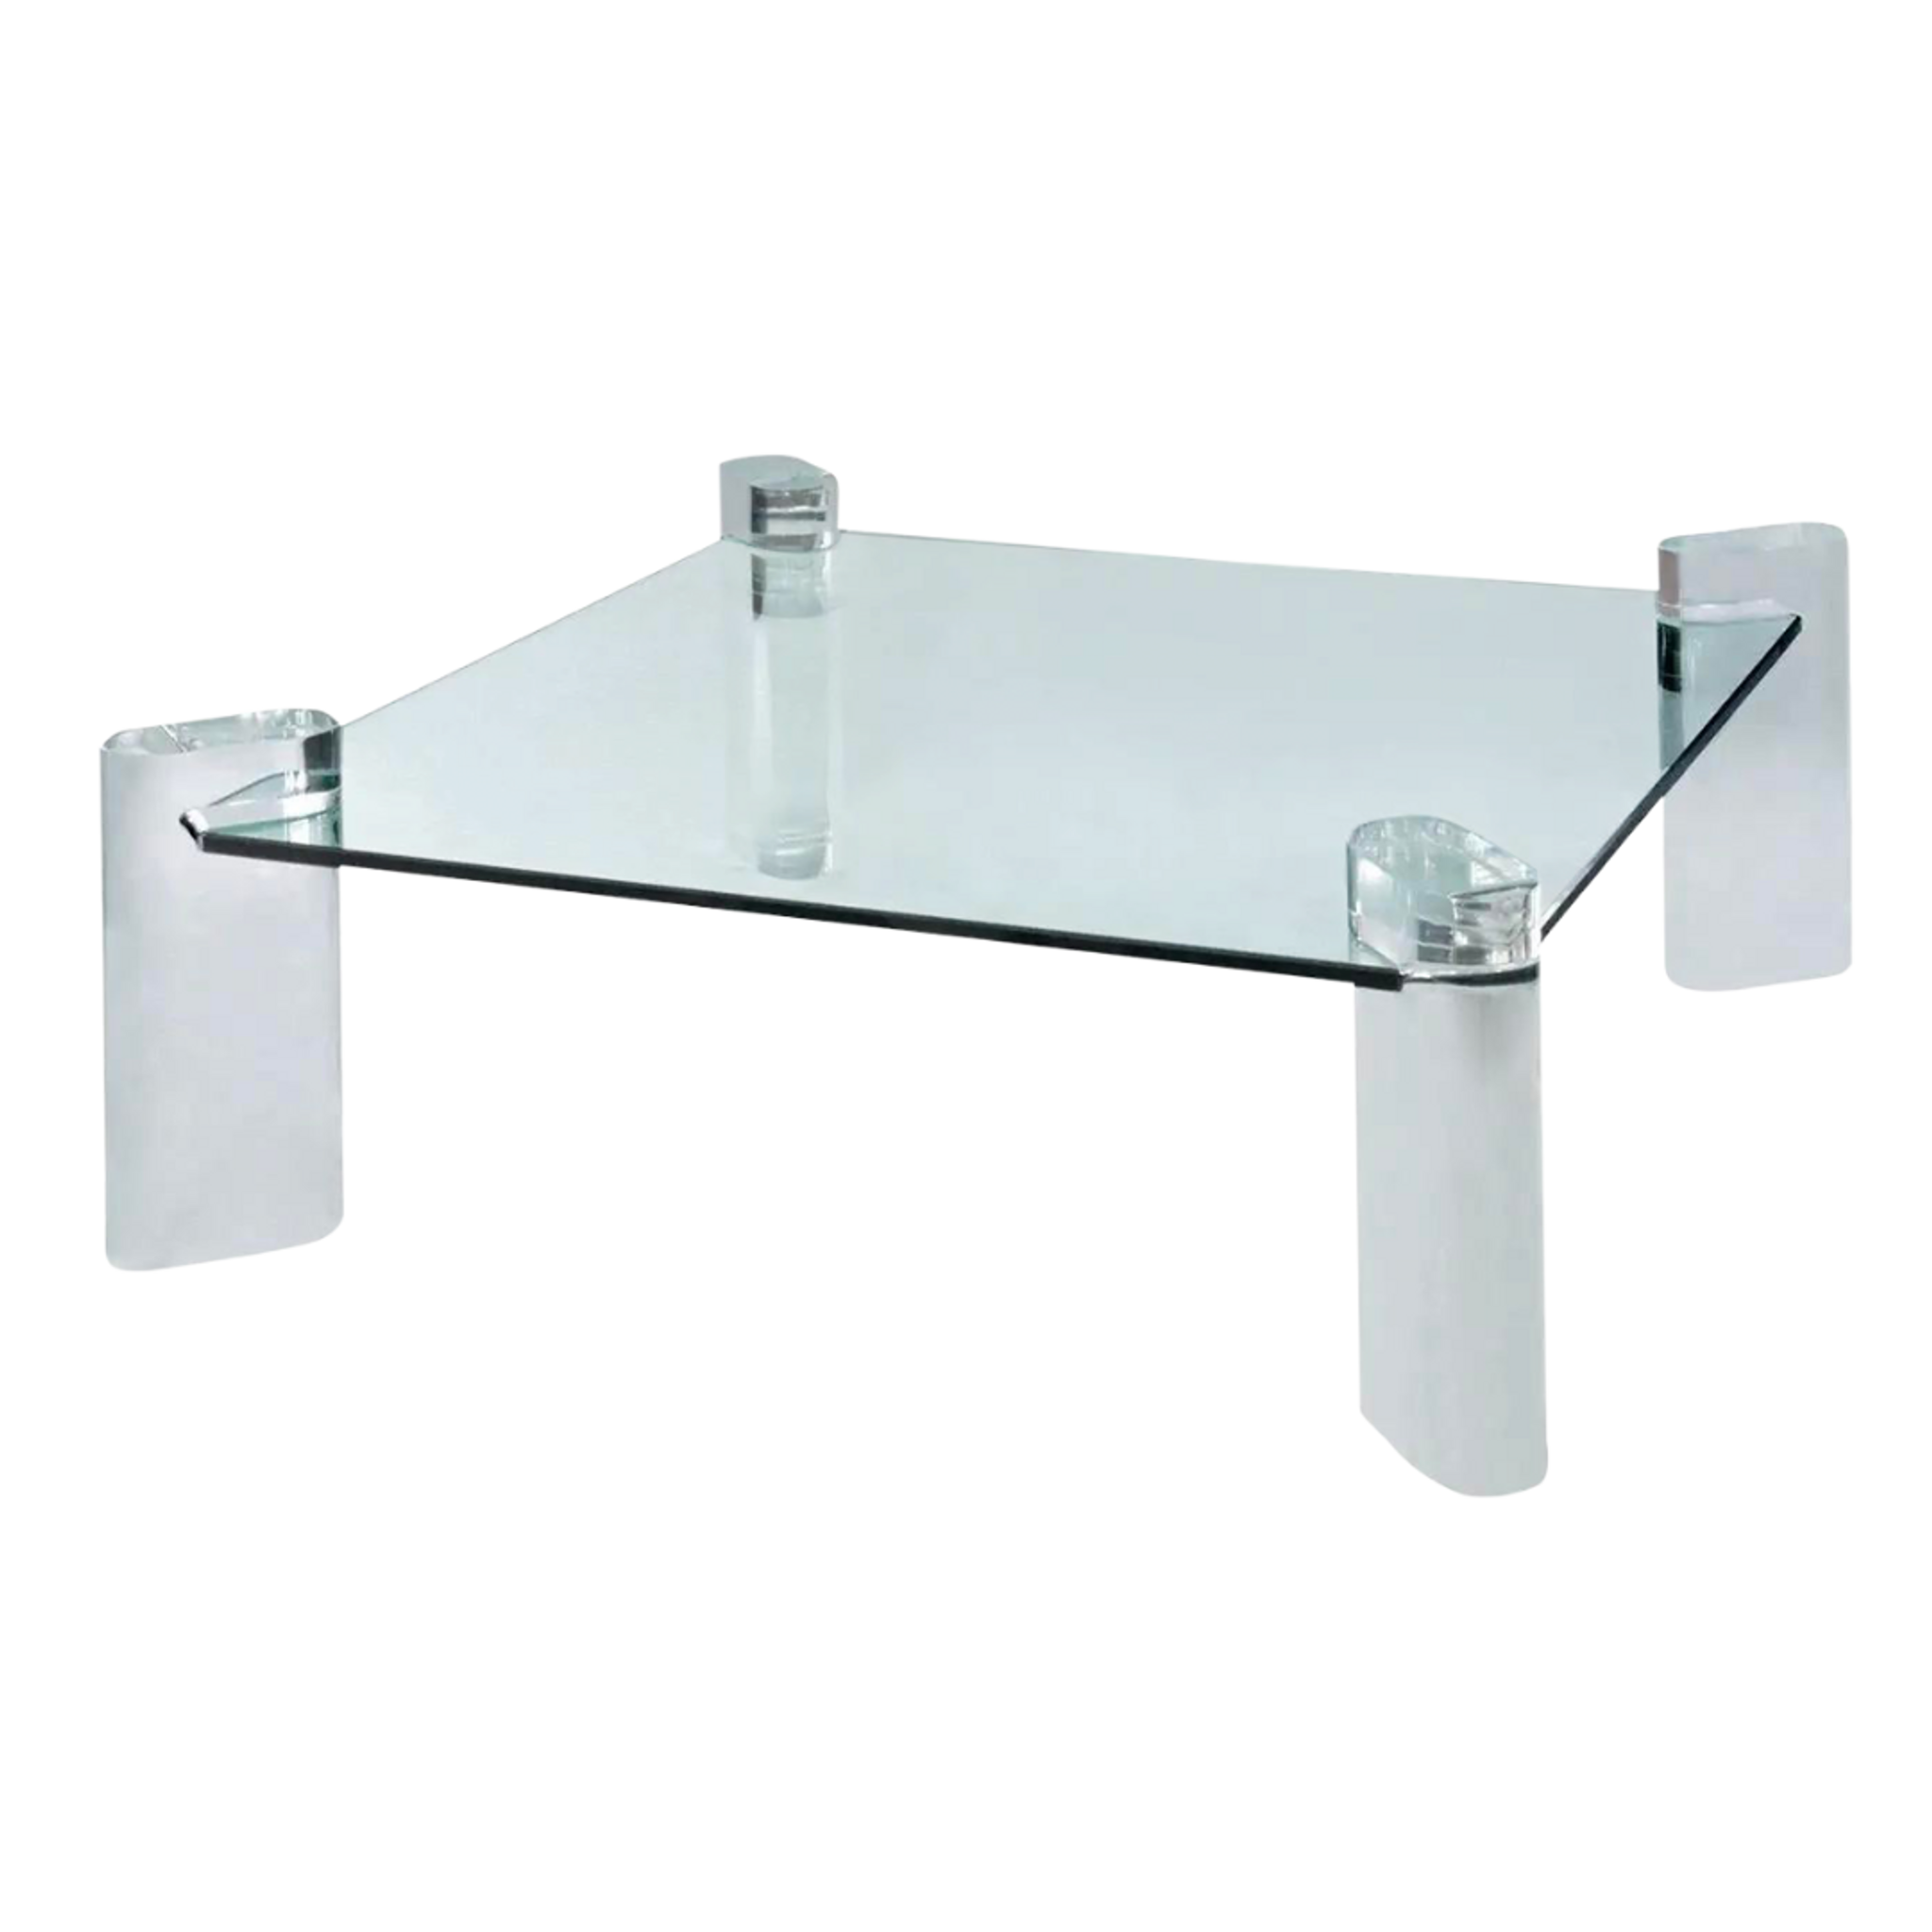 1970's Lucite Leg Square Coffee Table with Floating Glass Top